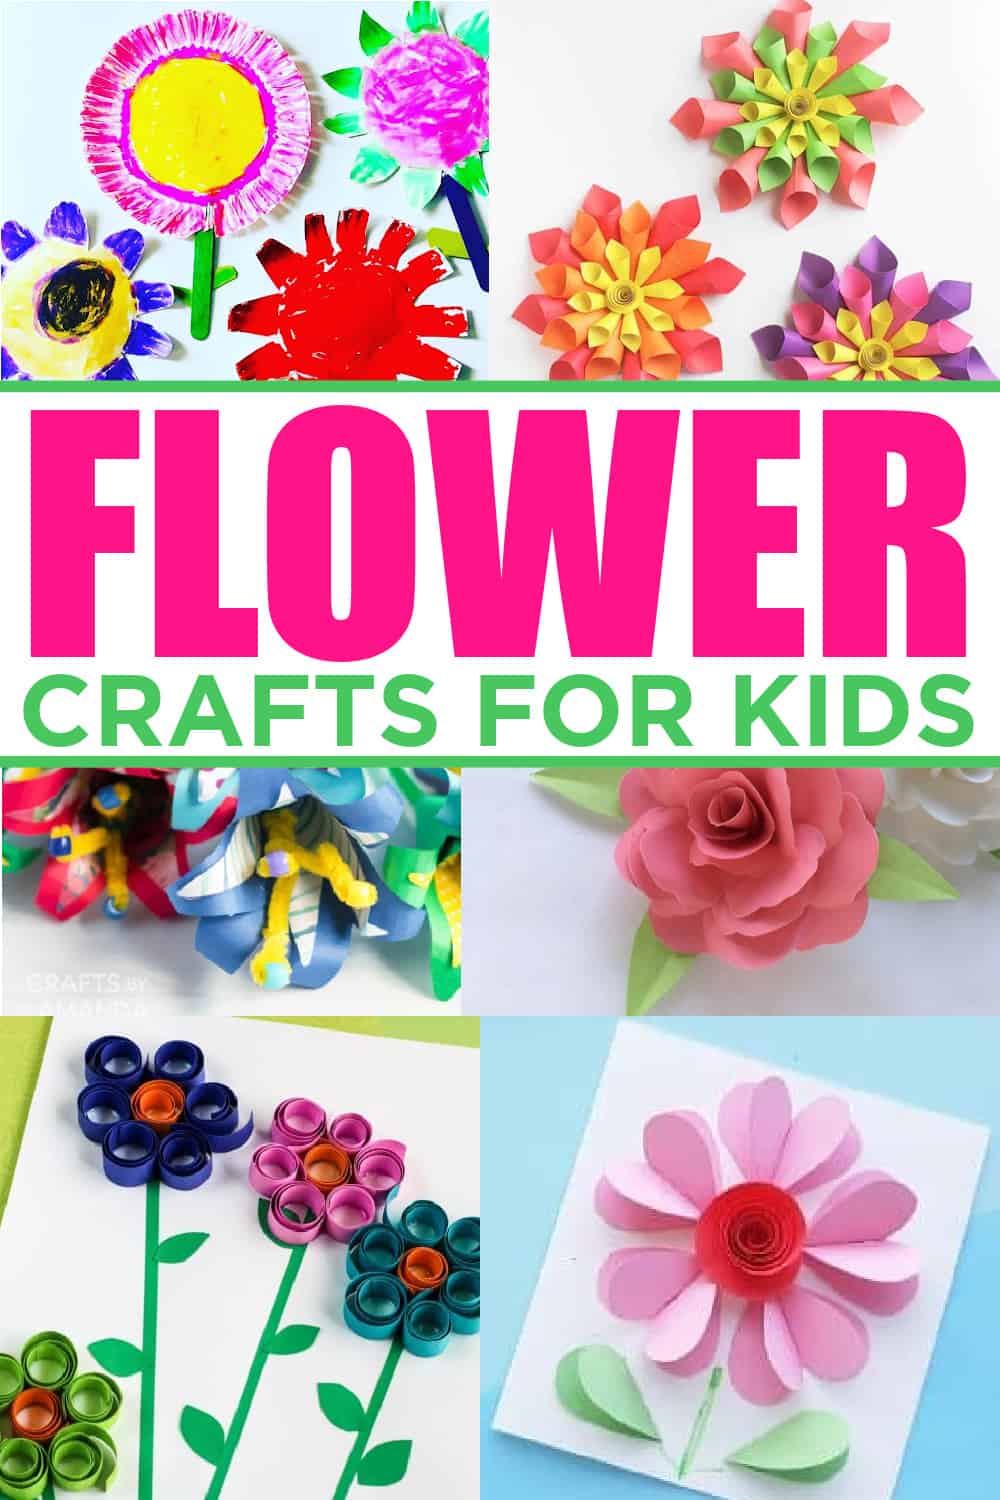 https://www.madewithhappy.com/wp-content/uploads/flower-crafts-for-kids.jpg